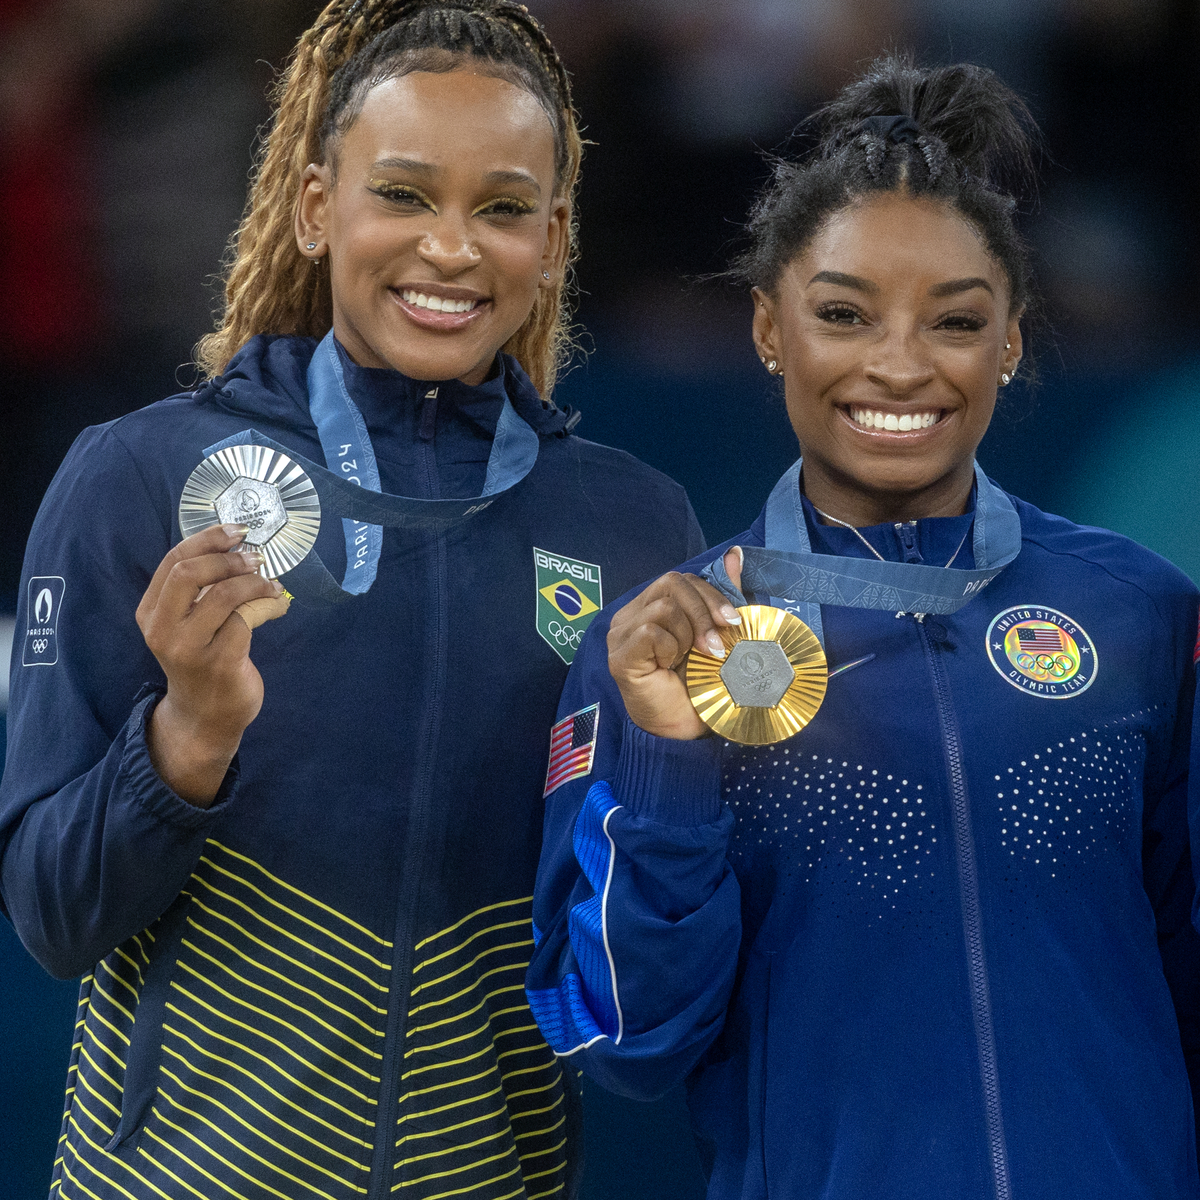 Why Simone Biles Was “Stressing” Competing Against Rebeca Andrade